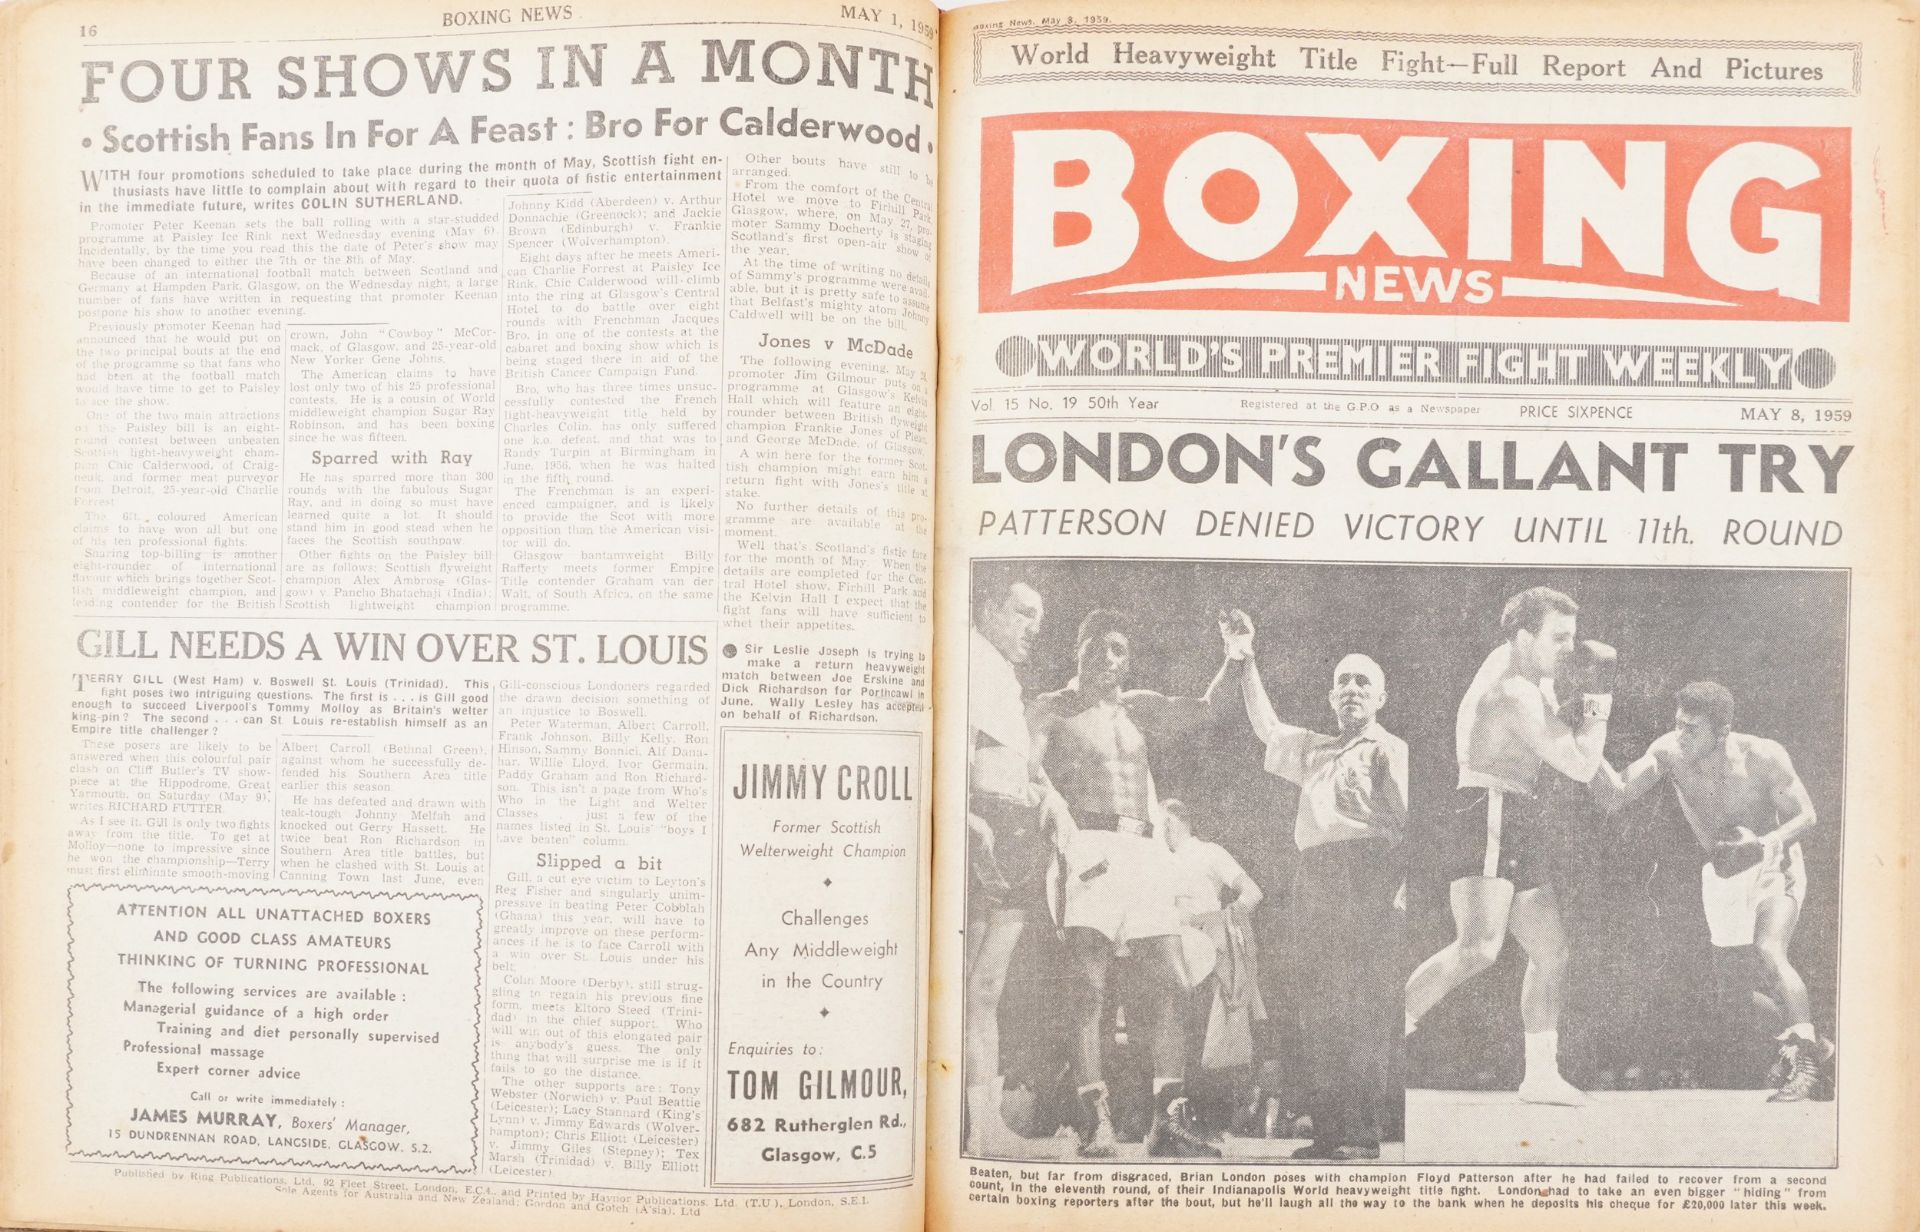 Collection of boxing ephemera including photographs and Boxing News : For further information on - Image 5 of 6